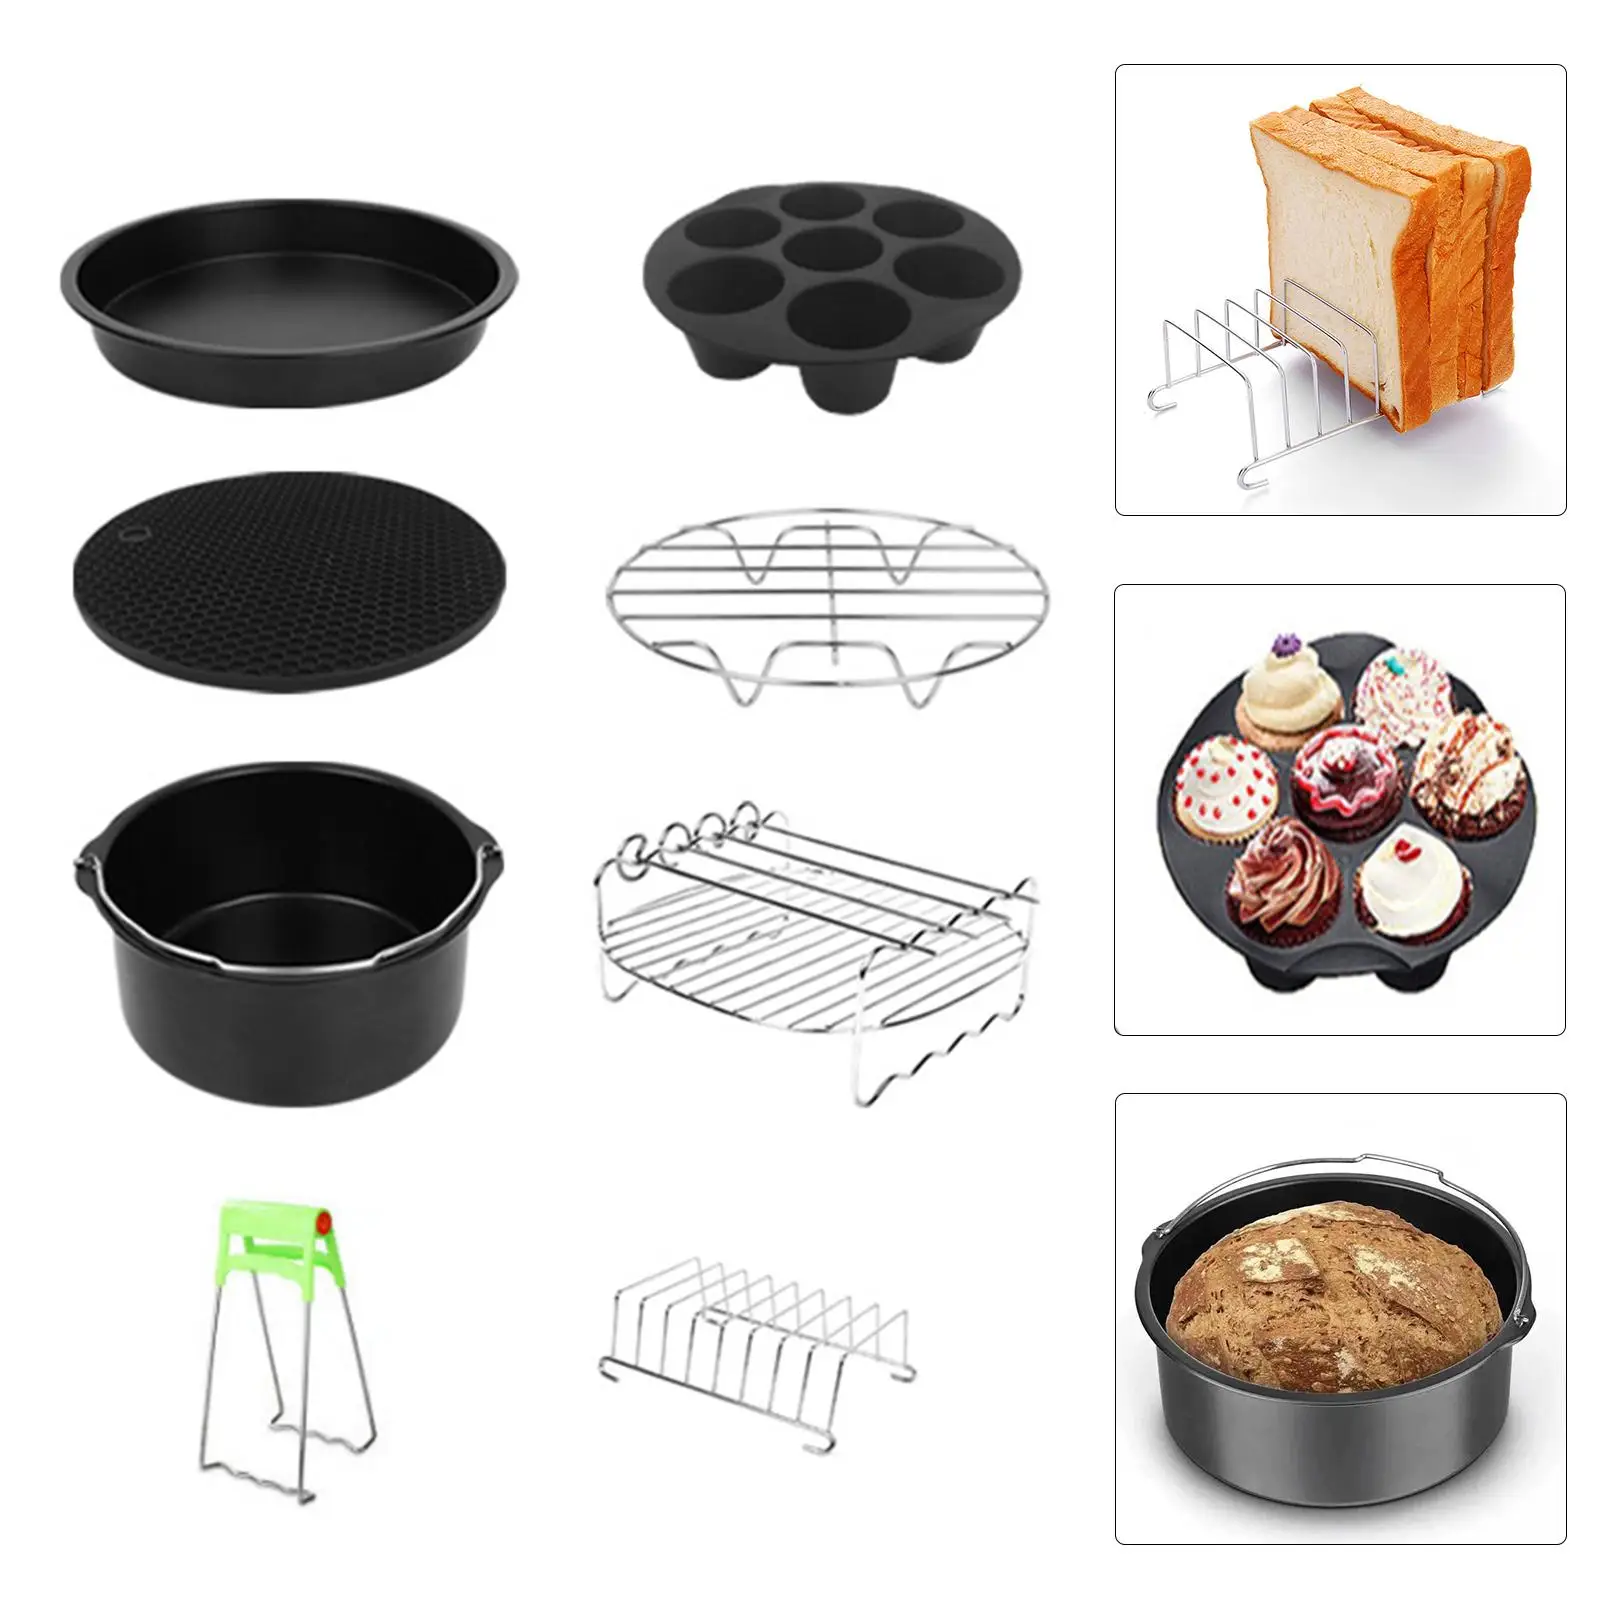 8x Non-Stick Air Fryer Accessories Set Air Fryer Parts Air Fryer Accessory Kit Cake Barrel Clamp for 3.5-6Qt BBQ Cooking Kitchen